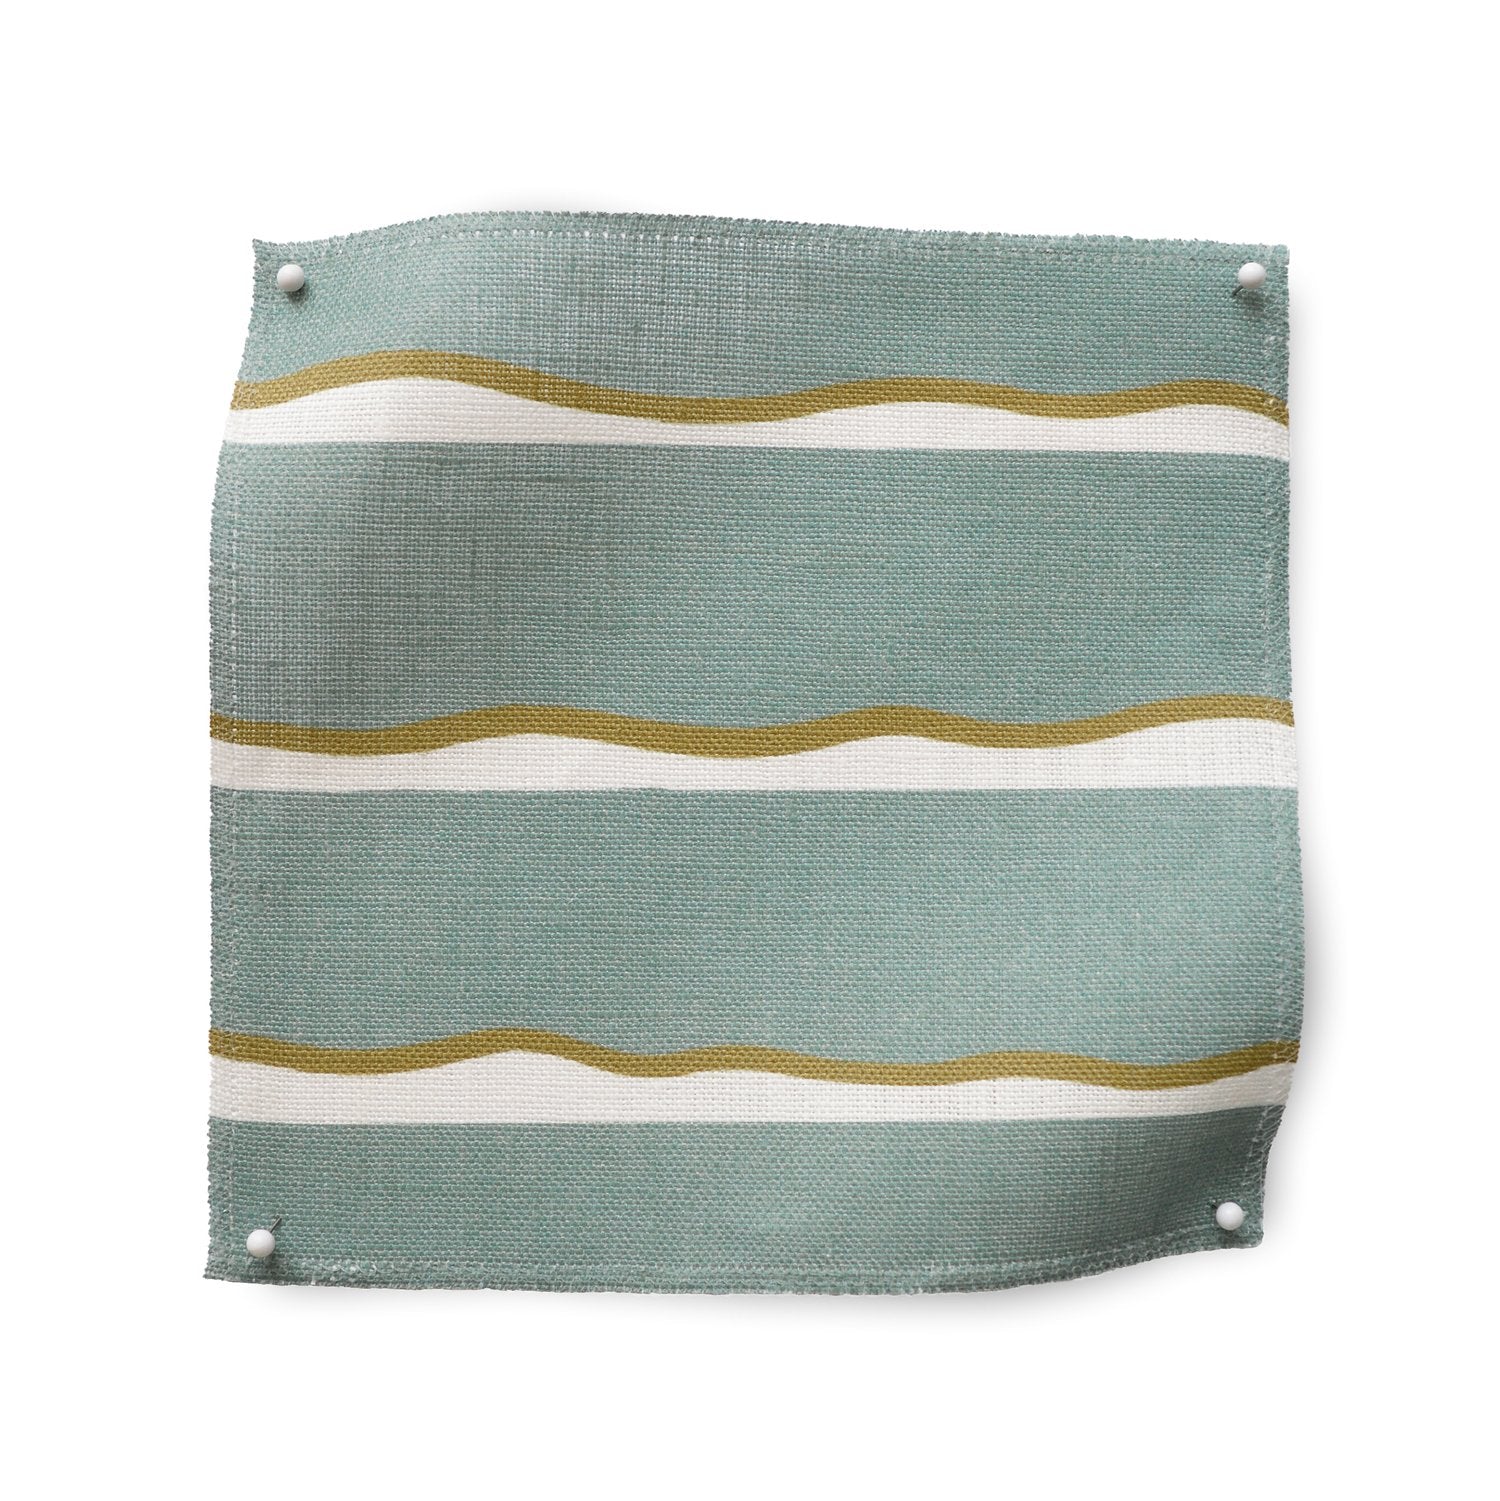 Square fabric swatch in a wide undulating stripe pattern in mustard and white on a light blue field.